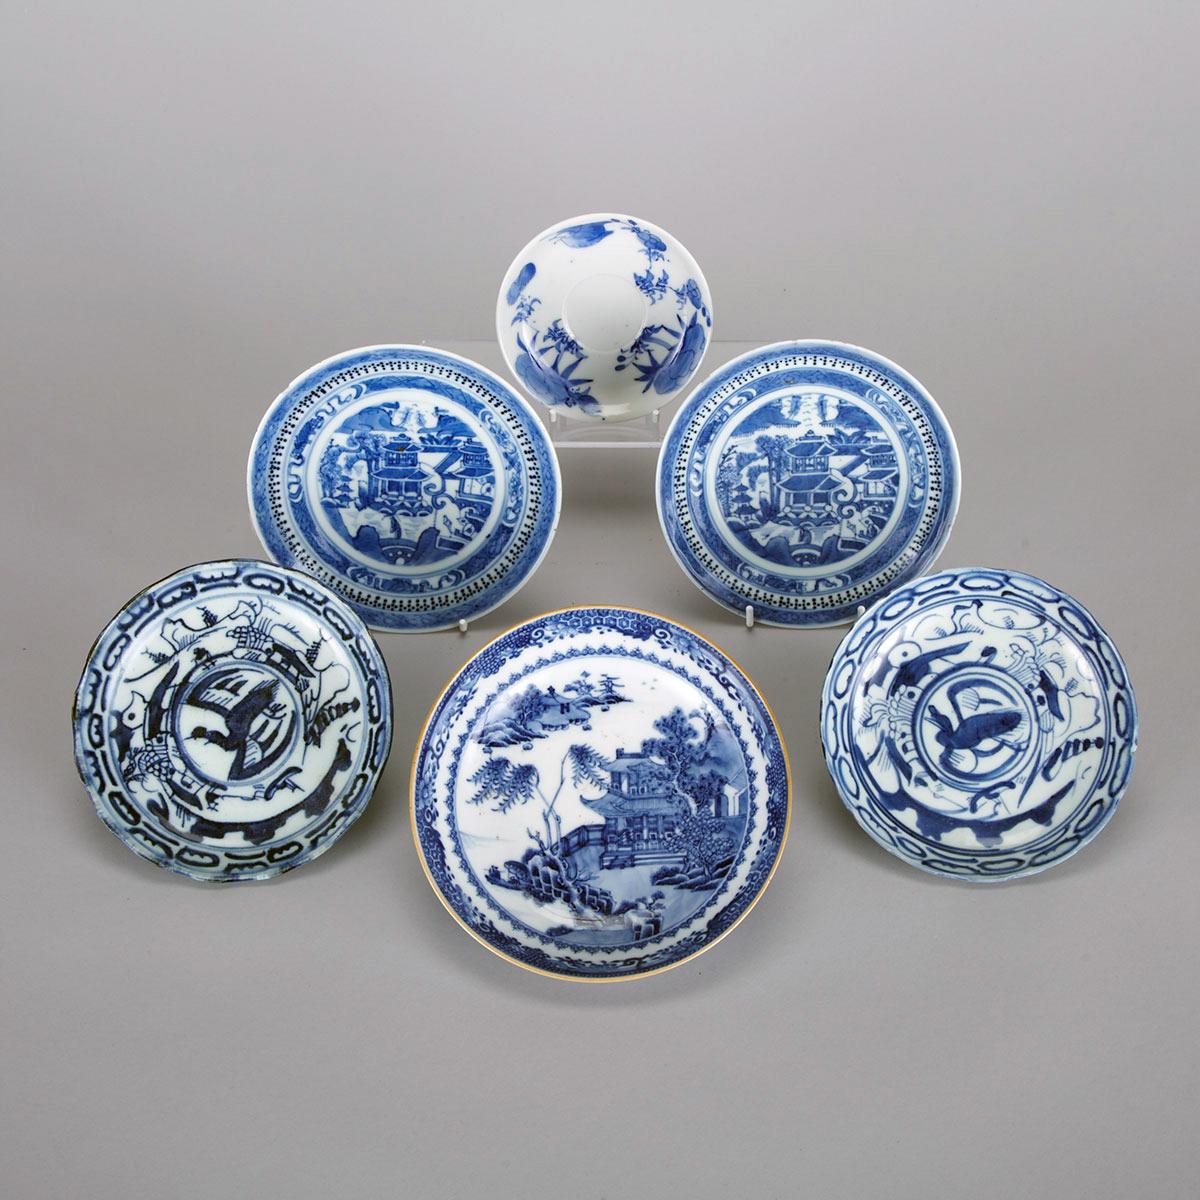 Six Export Blue and White Dishes, 17th to 19th Century, China/Japan